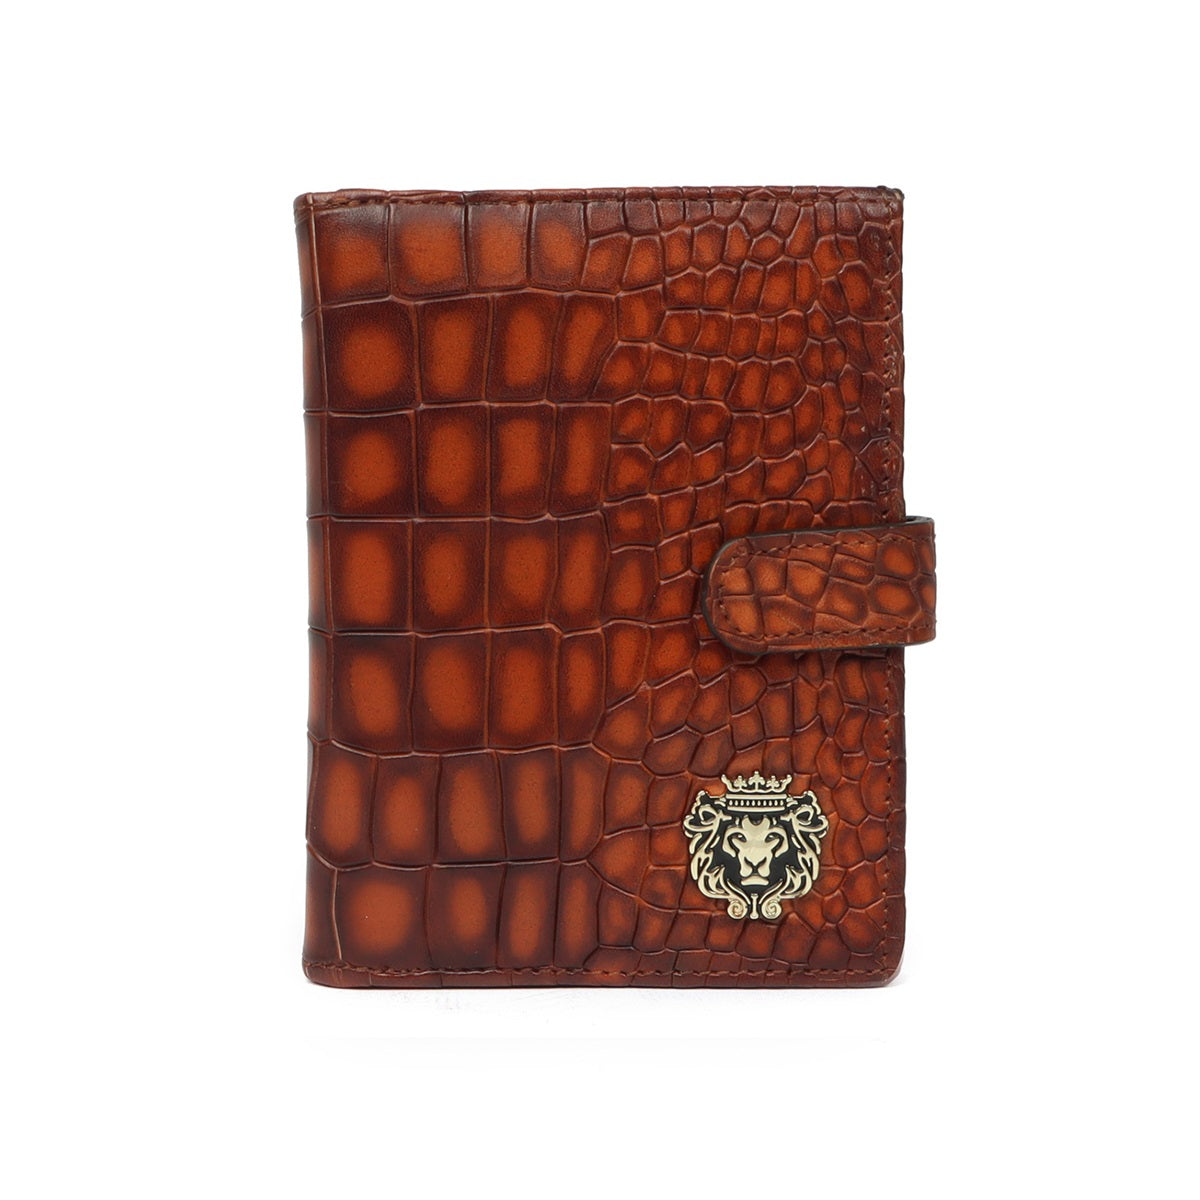 Burnished Tan Brown Deep Cut Croco Leather Passport Holder with Foldable Boarding Pass Pocket By Brune & Bareskin